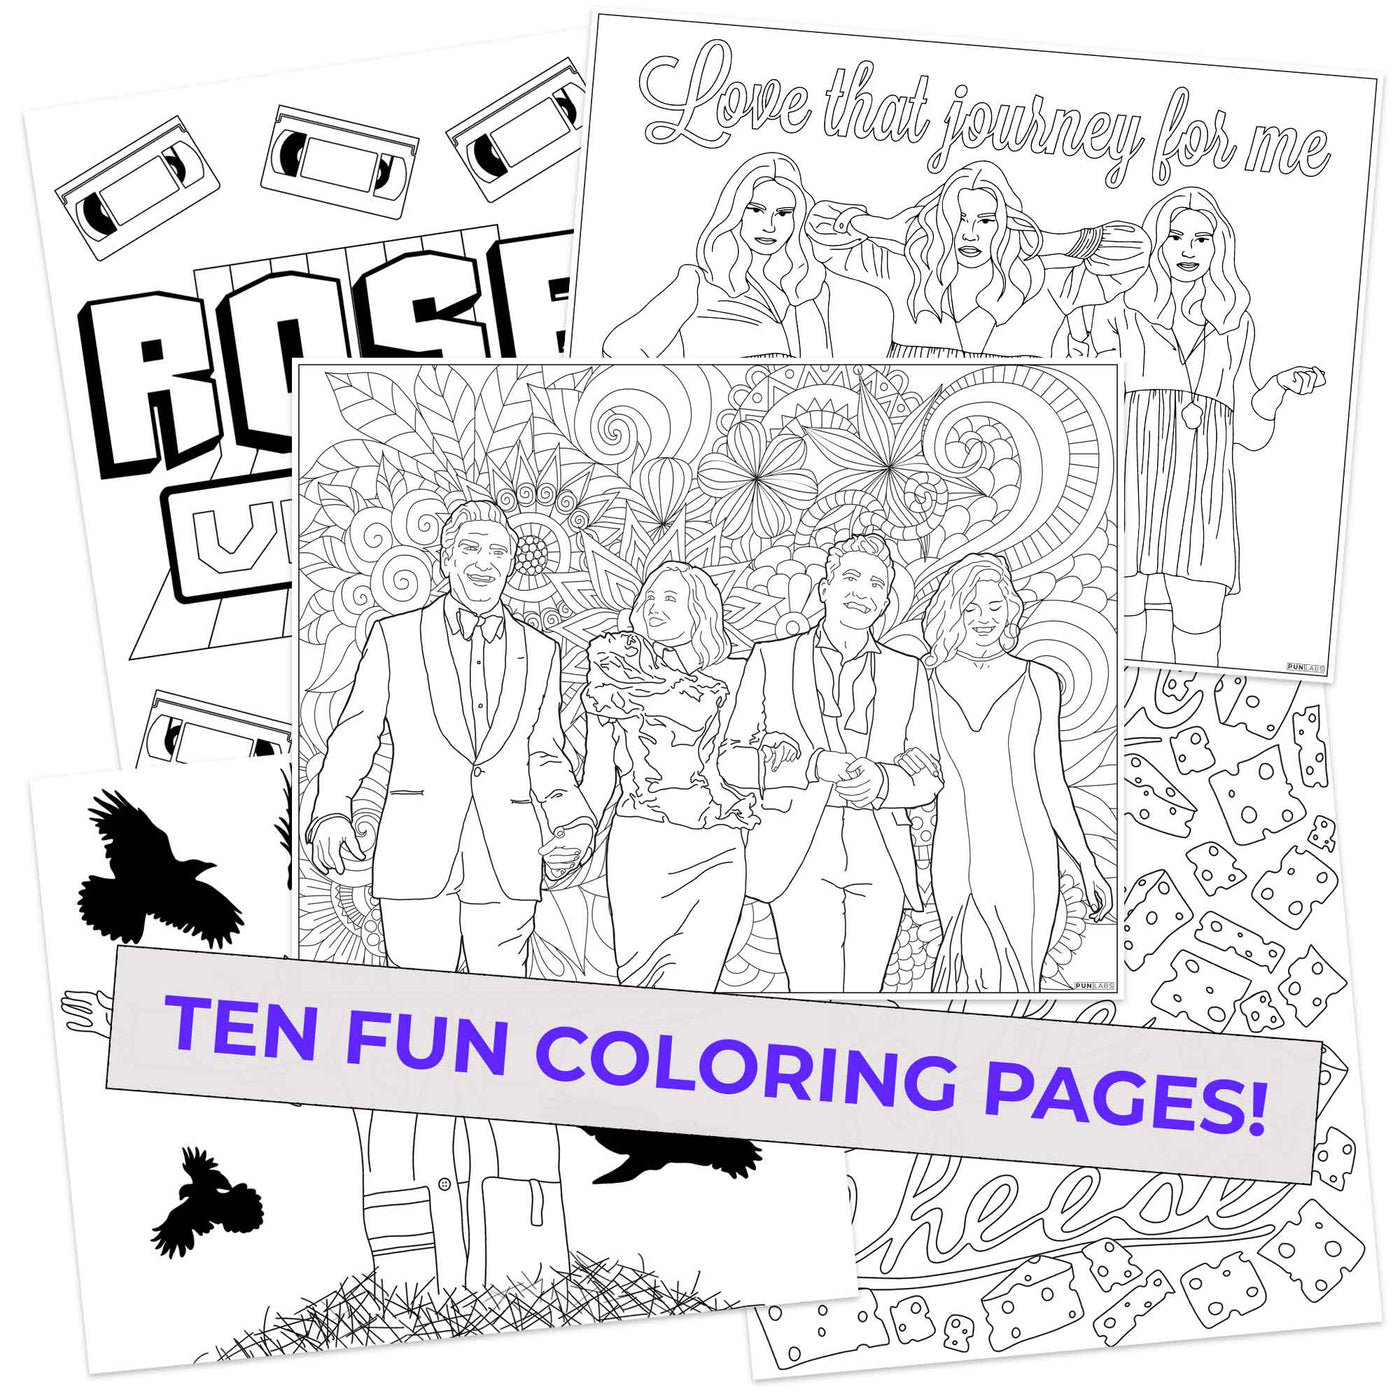 5 Schitty Colors coloring pages with a Schitt's Creek inspired theme